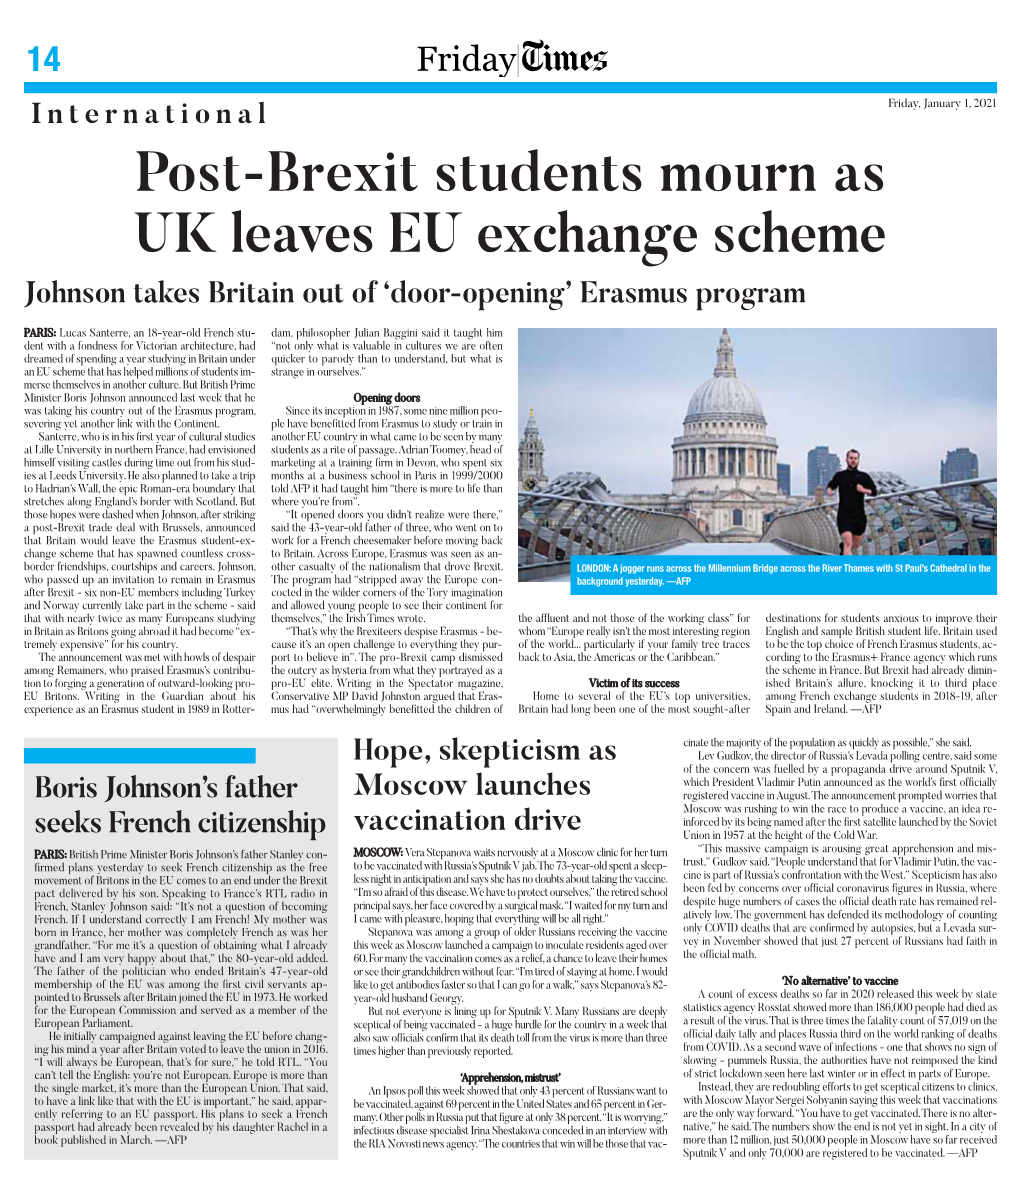 Post-Brexit Students Mourn As UK Leaves EU Exchange Scheme Johnson Takes Britain out of ‘Door-Opening’ Erasmus Program